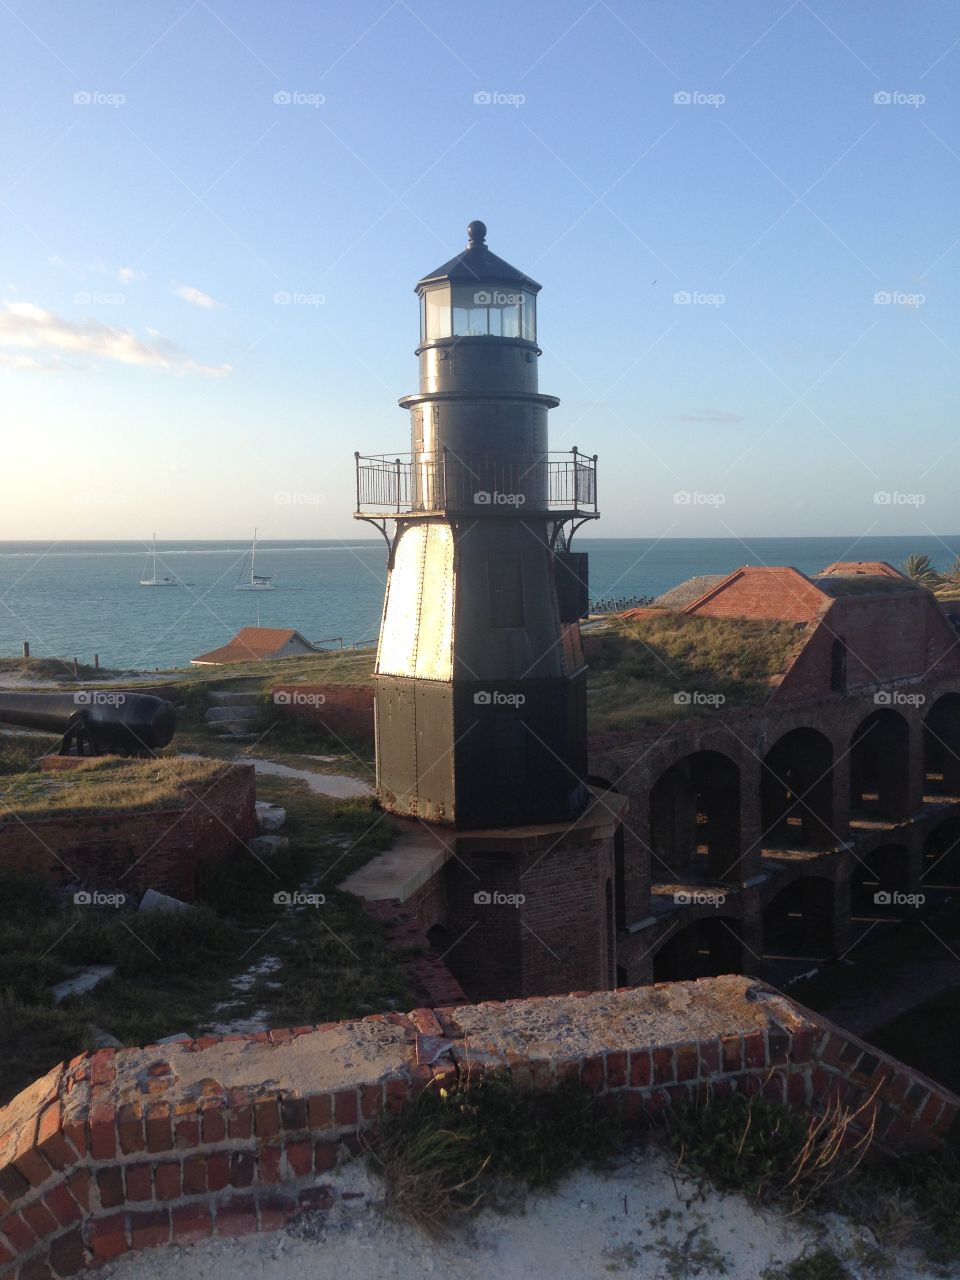 Lighthouse. The lighthouse at Fort Jefferson in the dry tourtgas 